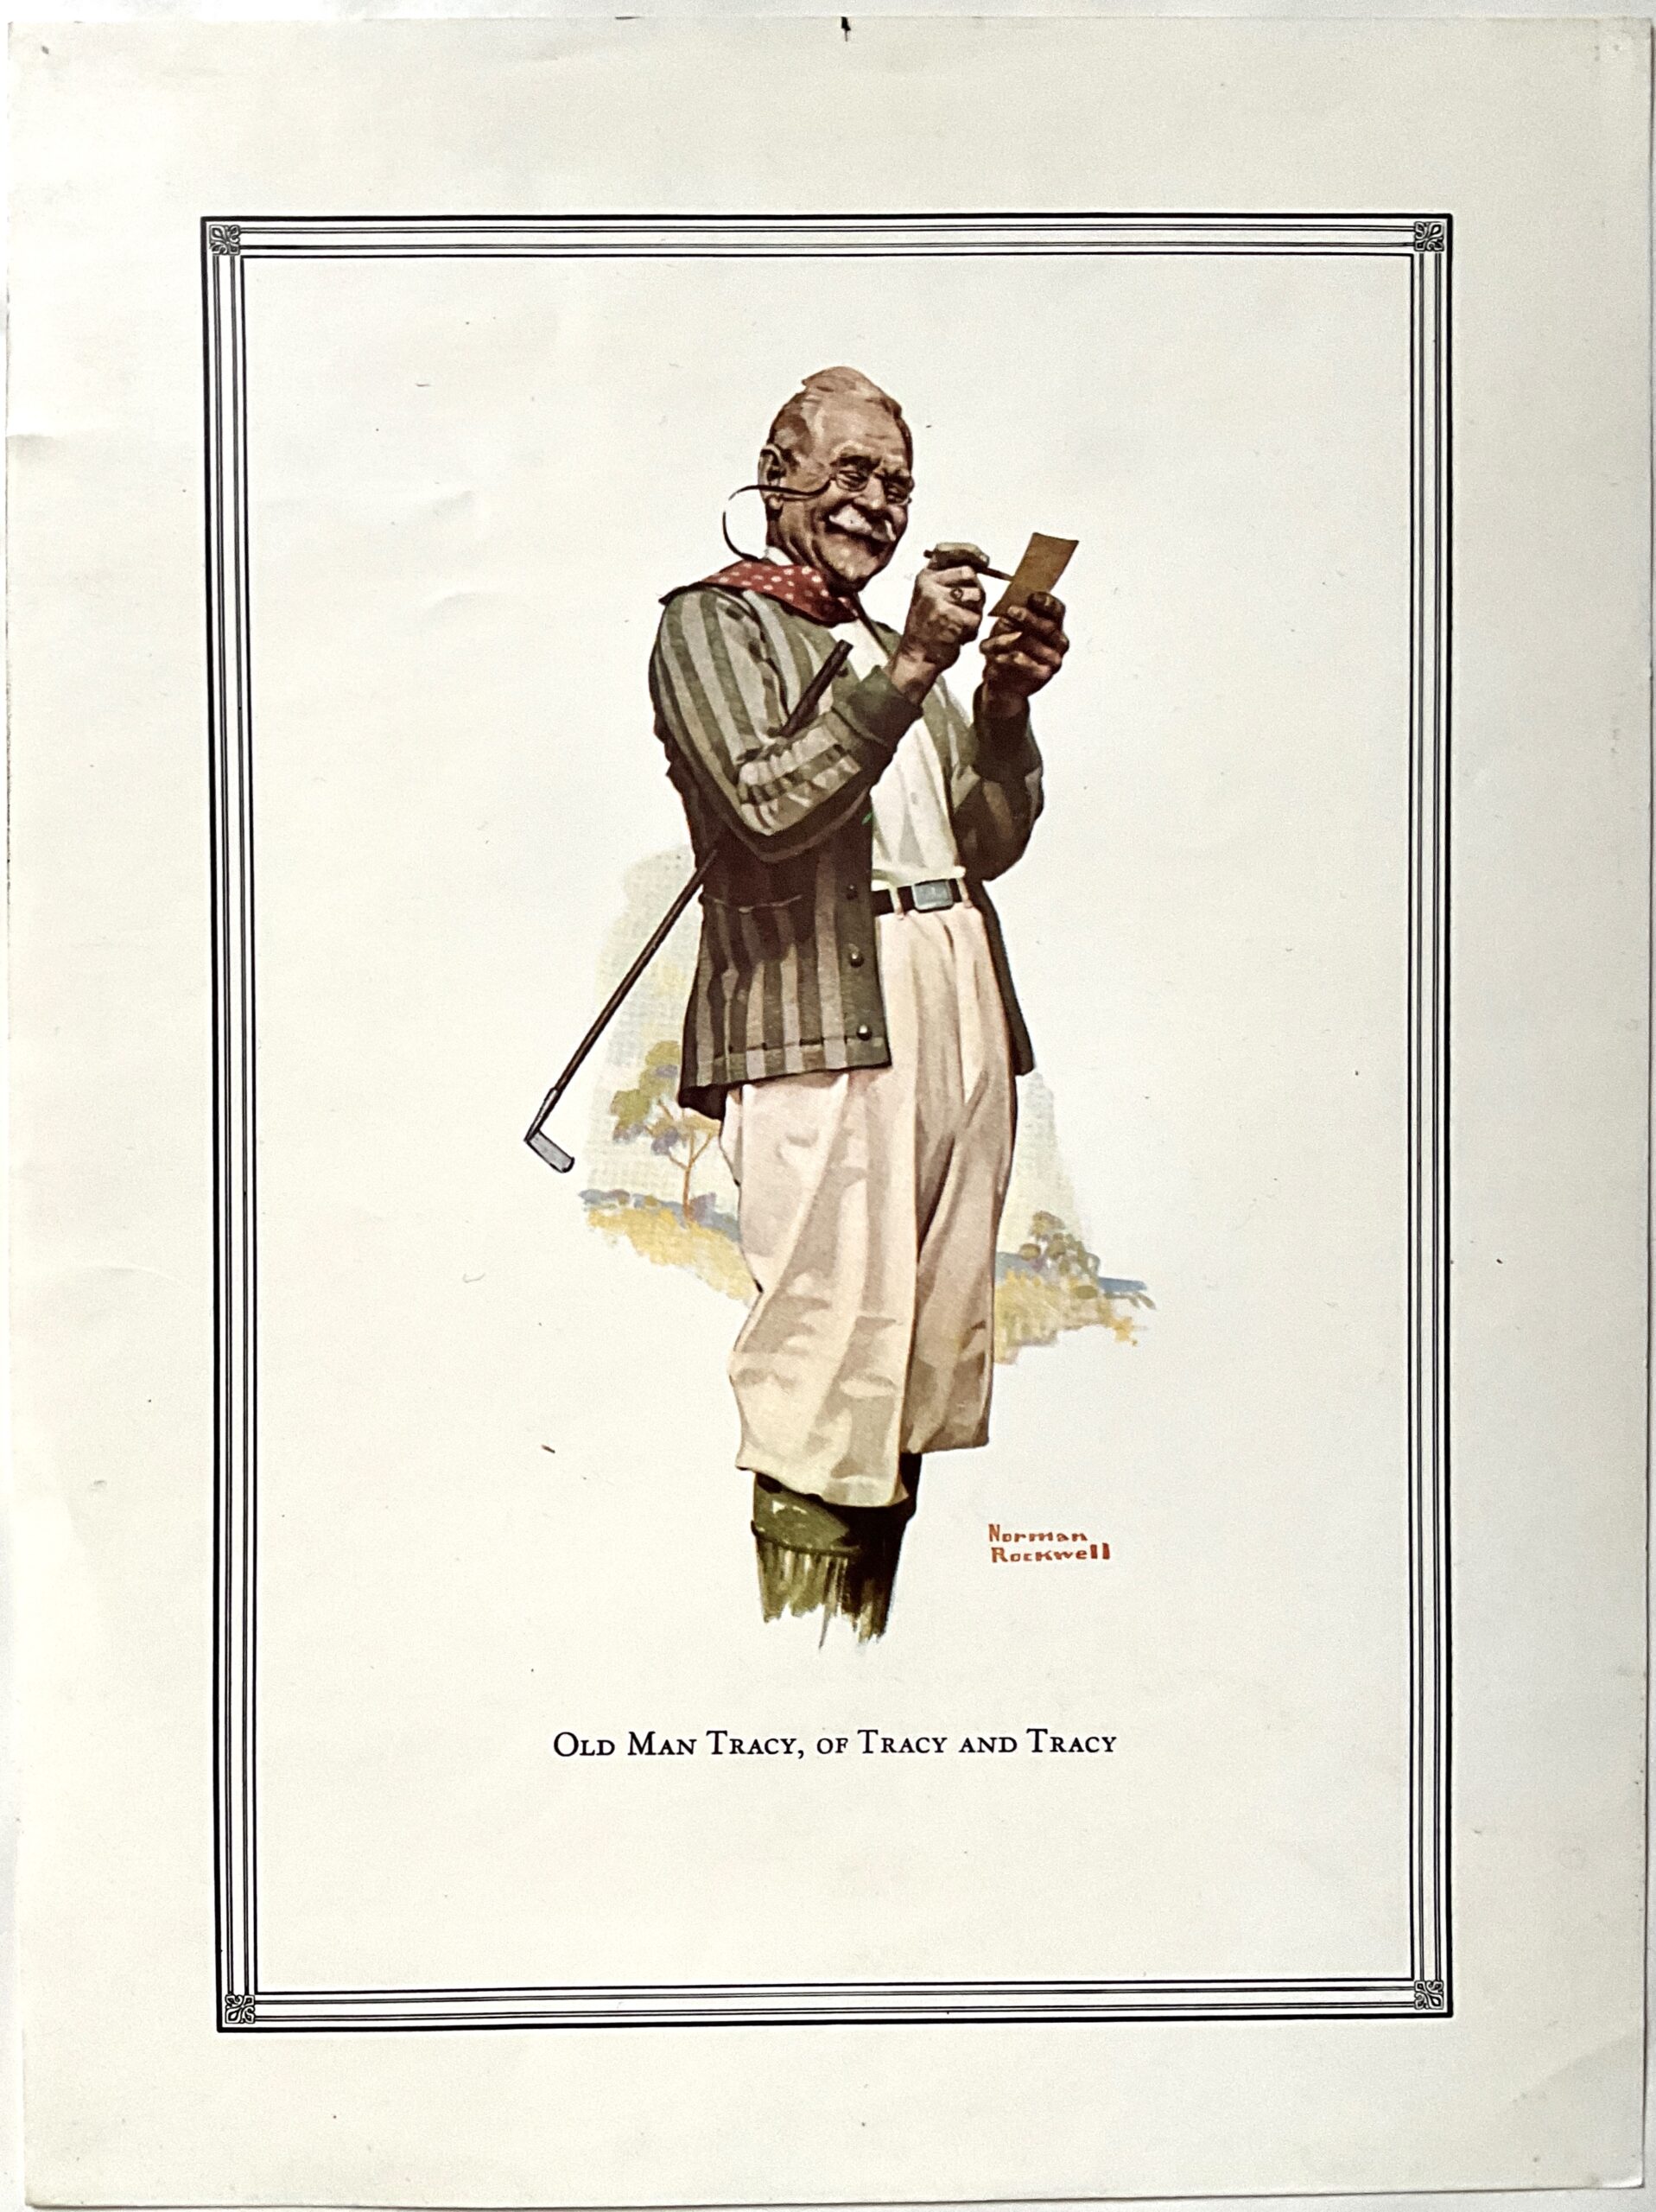 M174	GOLFING: 1920S NORMAN ROCKWELL - OLD MAN TRACY, OF TRACY AND TRACY